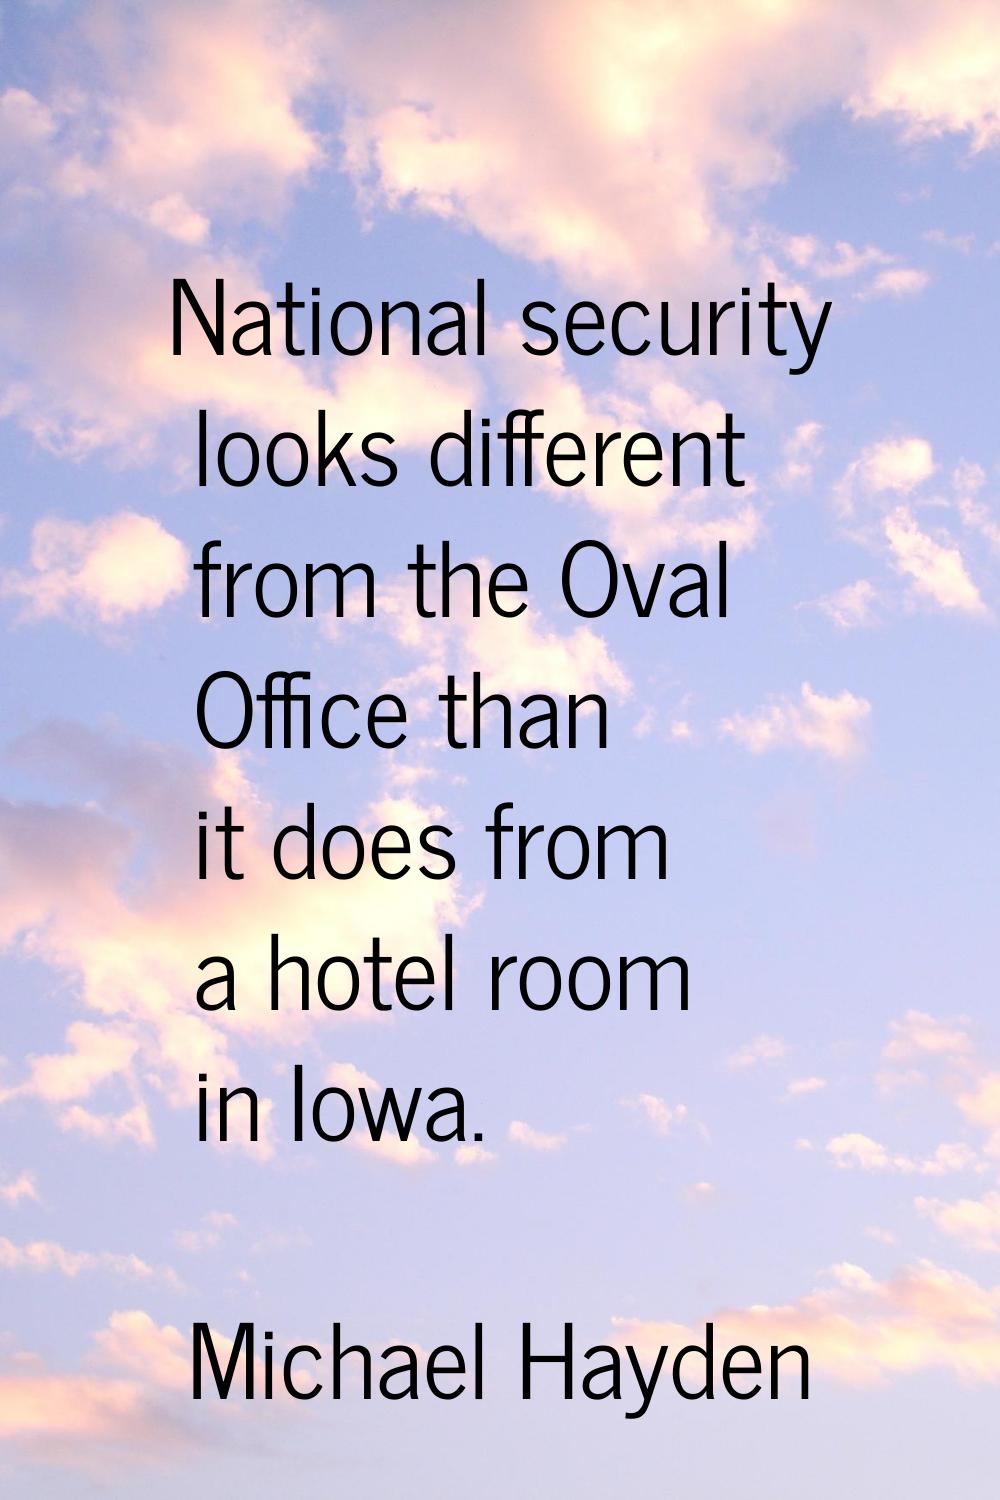 National security looks different from the Oval Office than it does from a hotel room in Iowa.